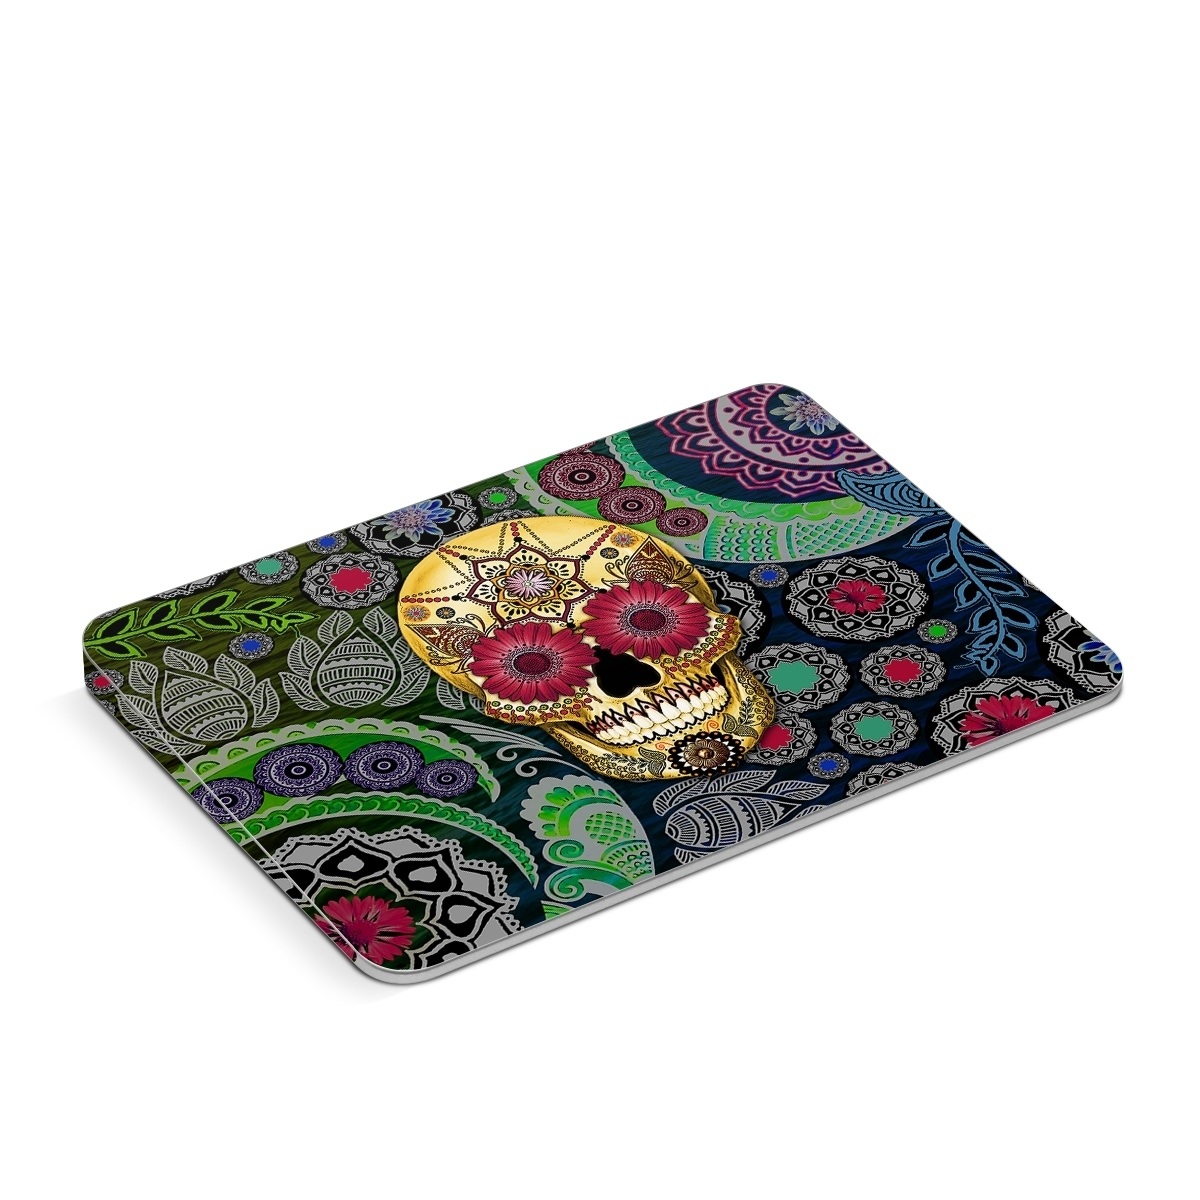 Apple Magic Trackpad Skin design of Skull, Bone, Pattern, Psychedelic art, Visual arts, Design, Illustration, Art, Textile, Plant, with black, red, gray, green, blue colors